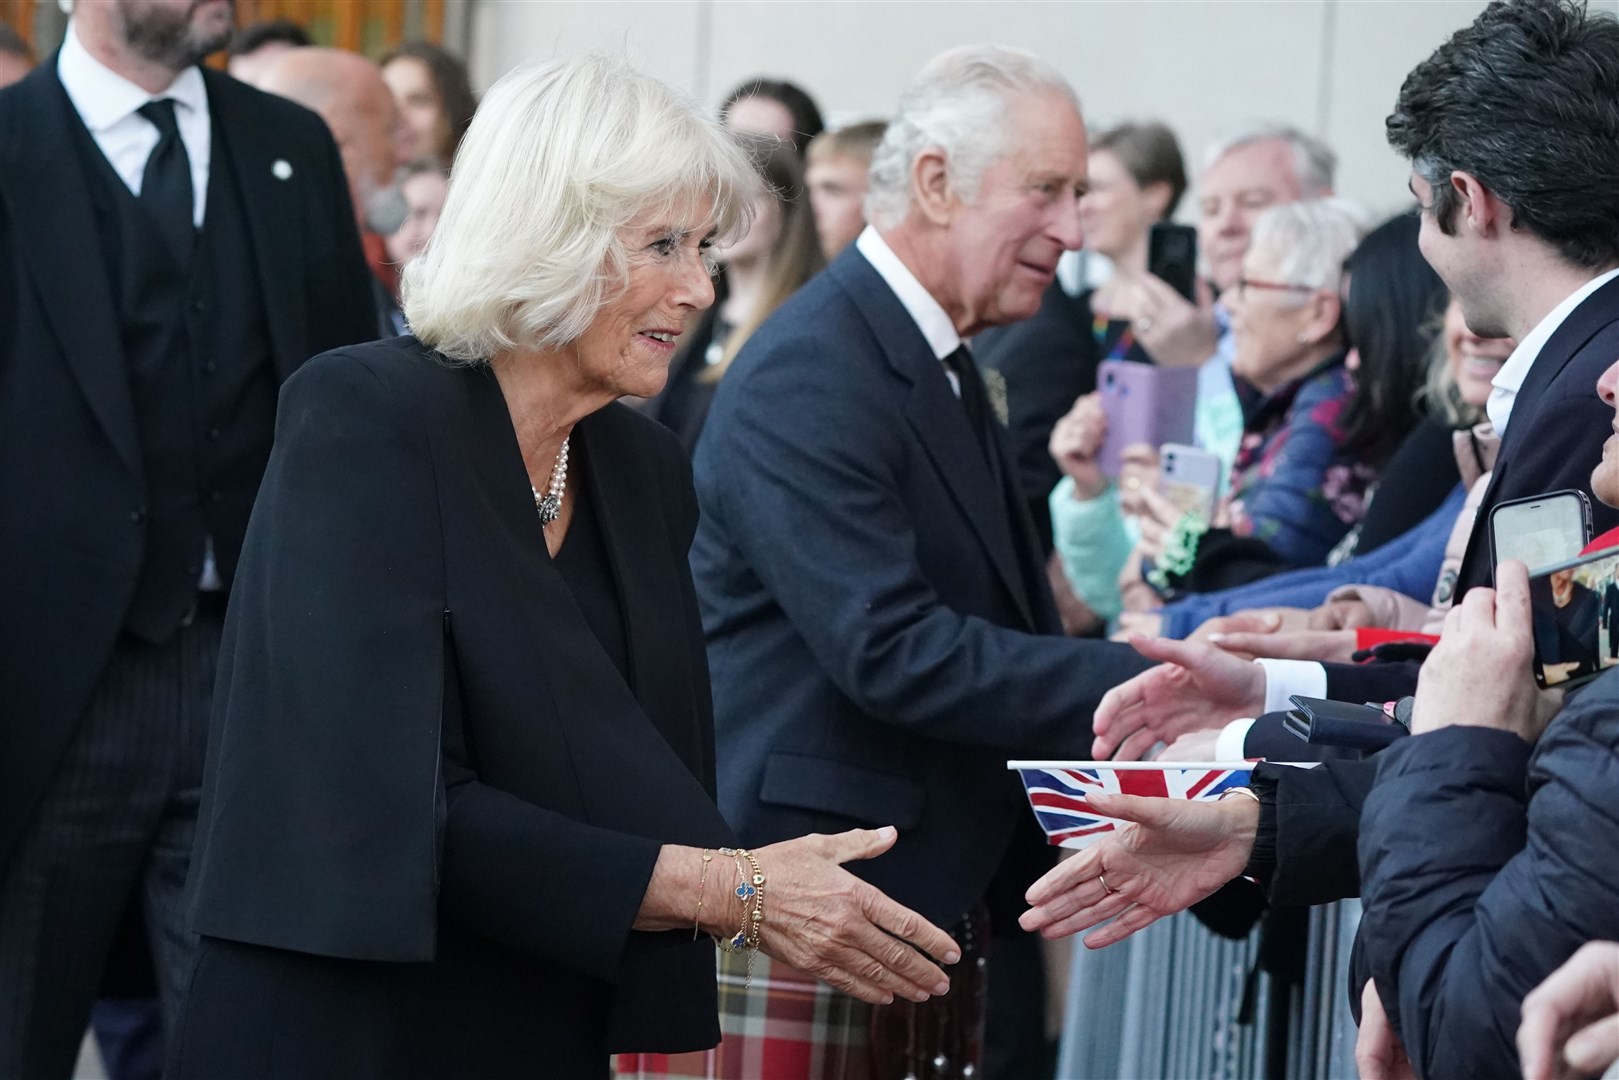 Charles and Camilla met members of the public when they left the Scottish Parliament (Andrew Milligan/PA)